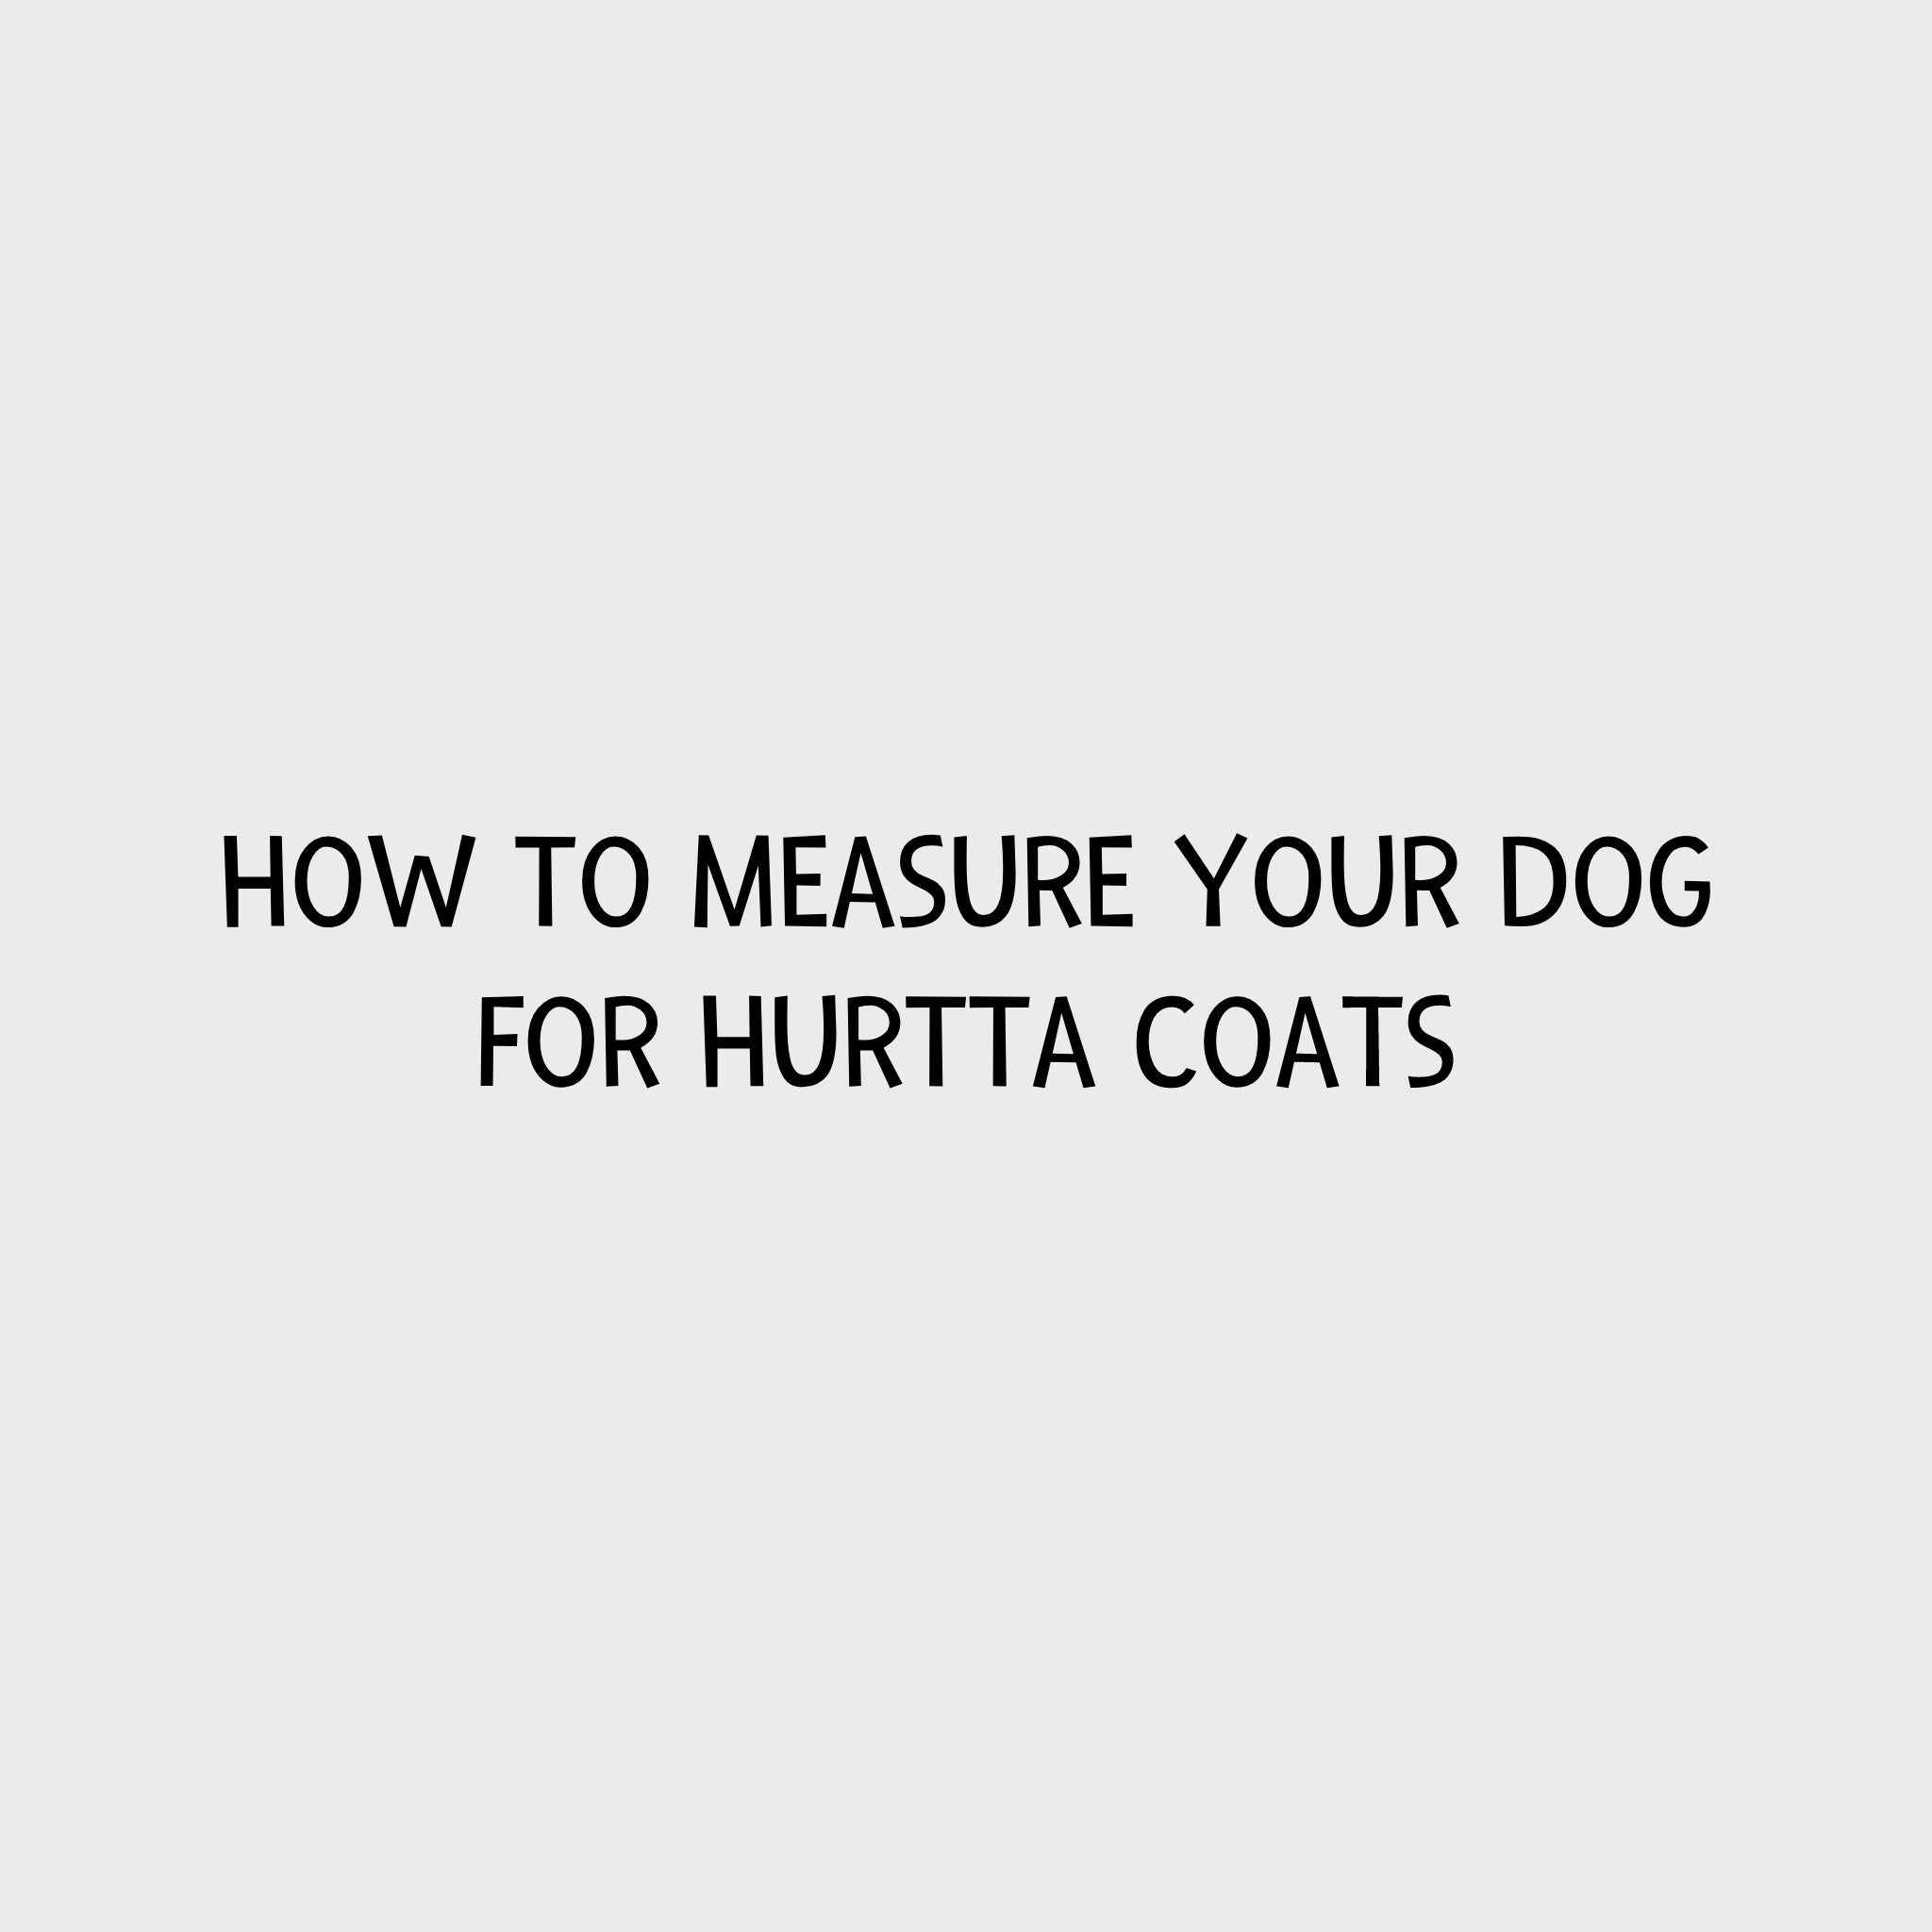 Video - How to measure your dog for Hurtta coats